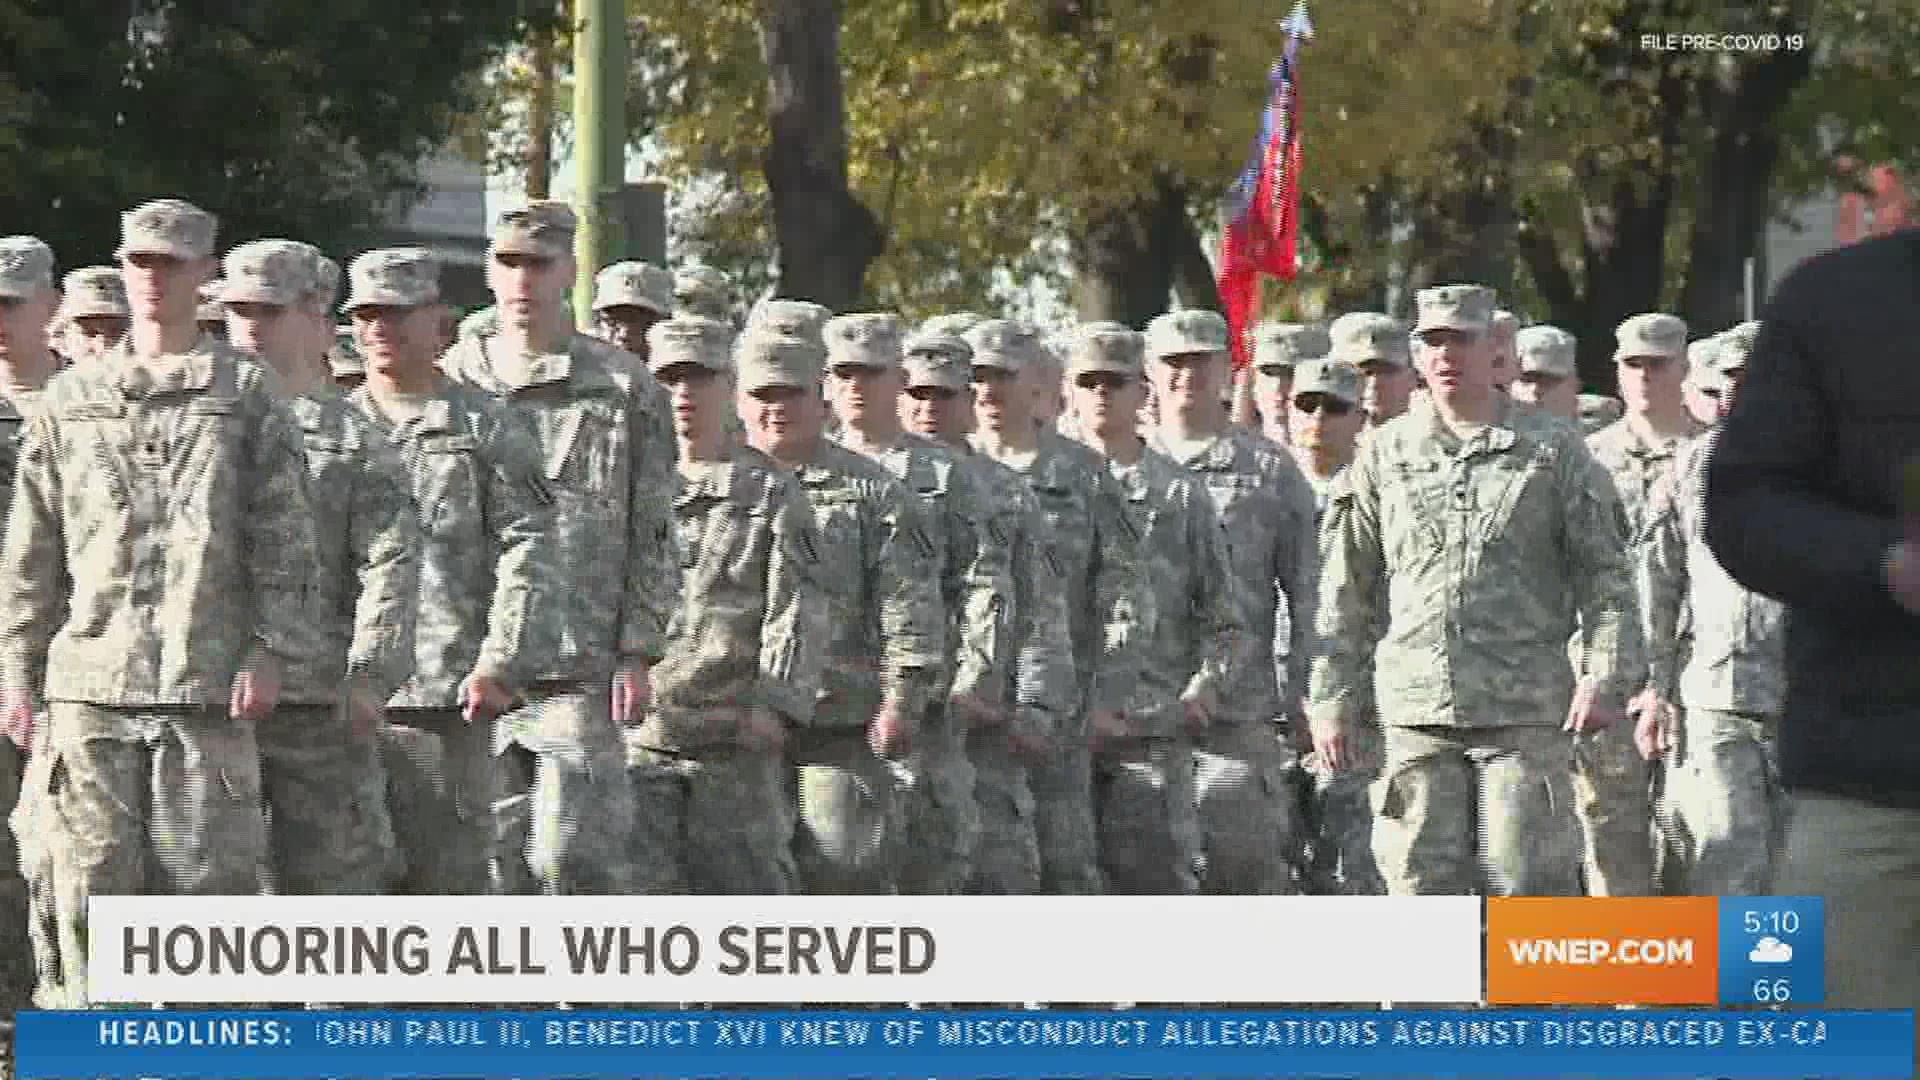 Newswatch 16 talked with two vets from central PA on what Veterans Day means to them and how it's changed a bit during COVID-19.